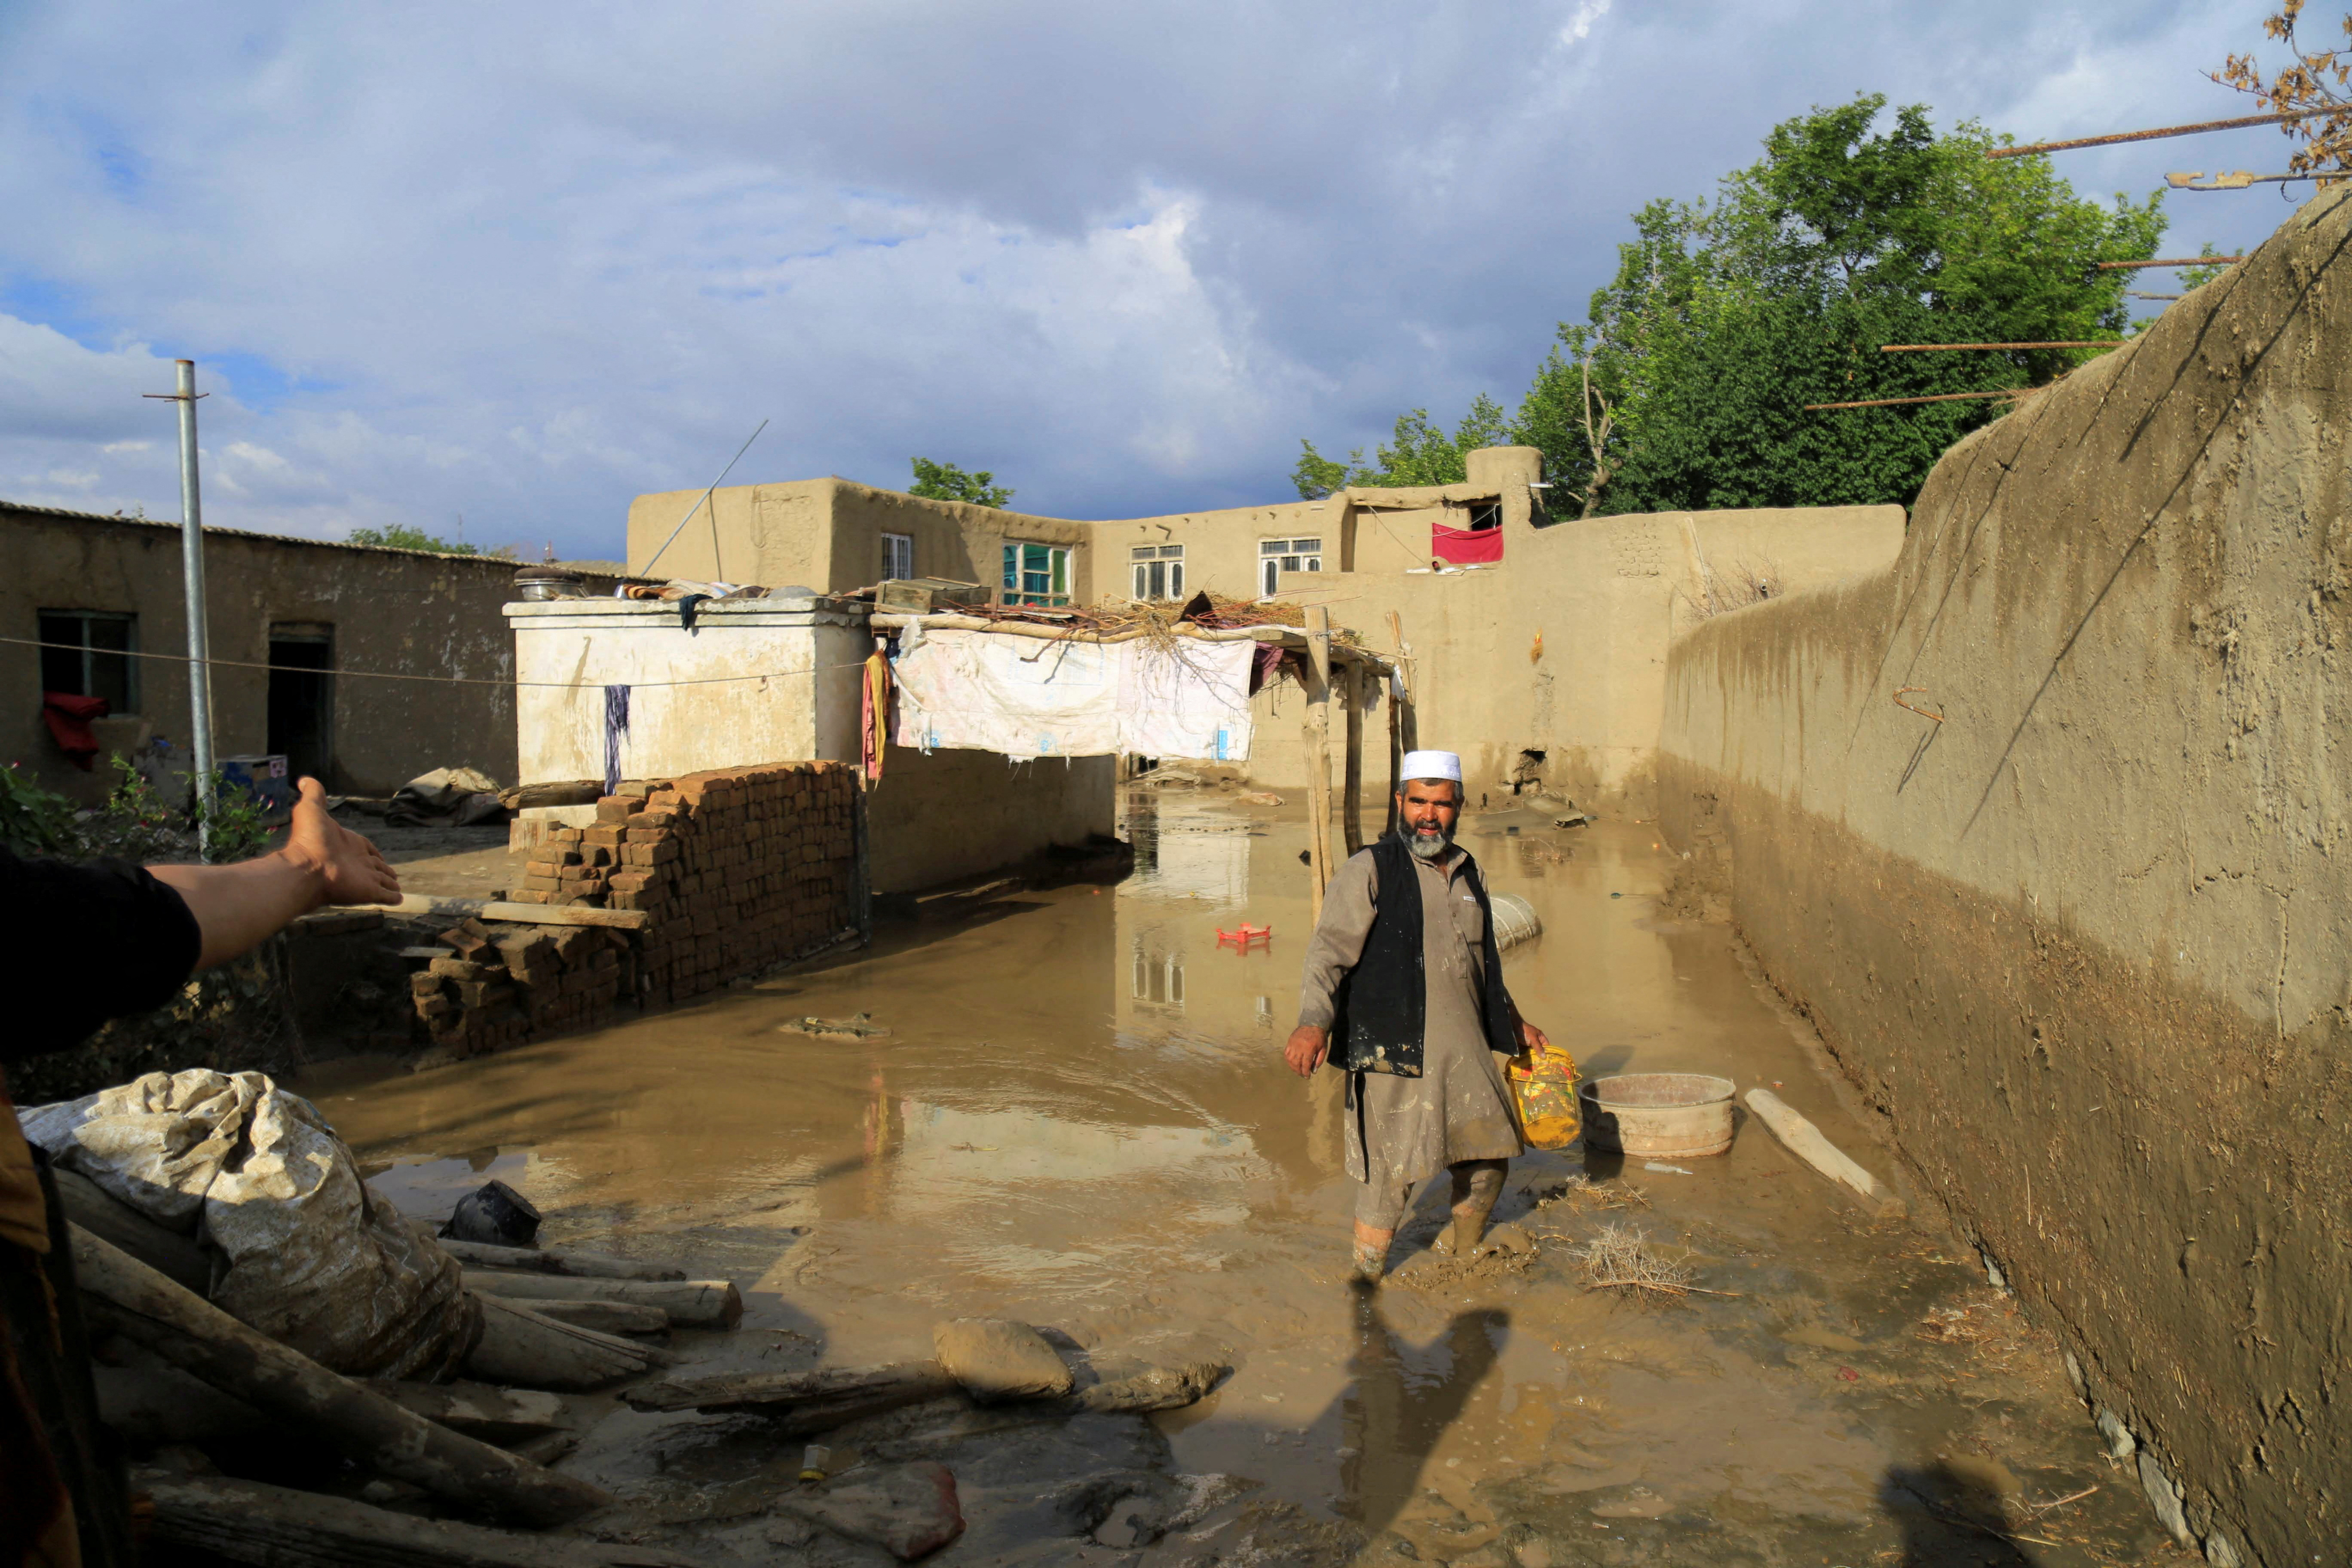 An Afghan man cleans up his damaged home after the heavy flood in the Khushi district of Logar